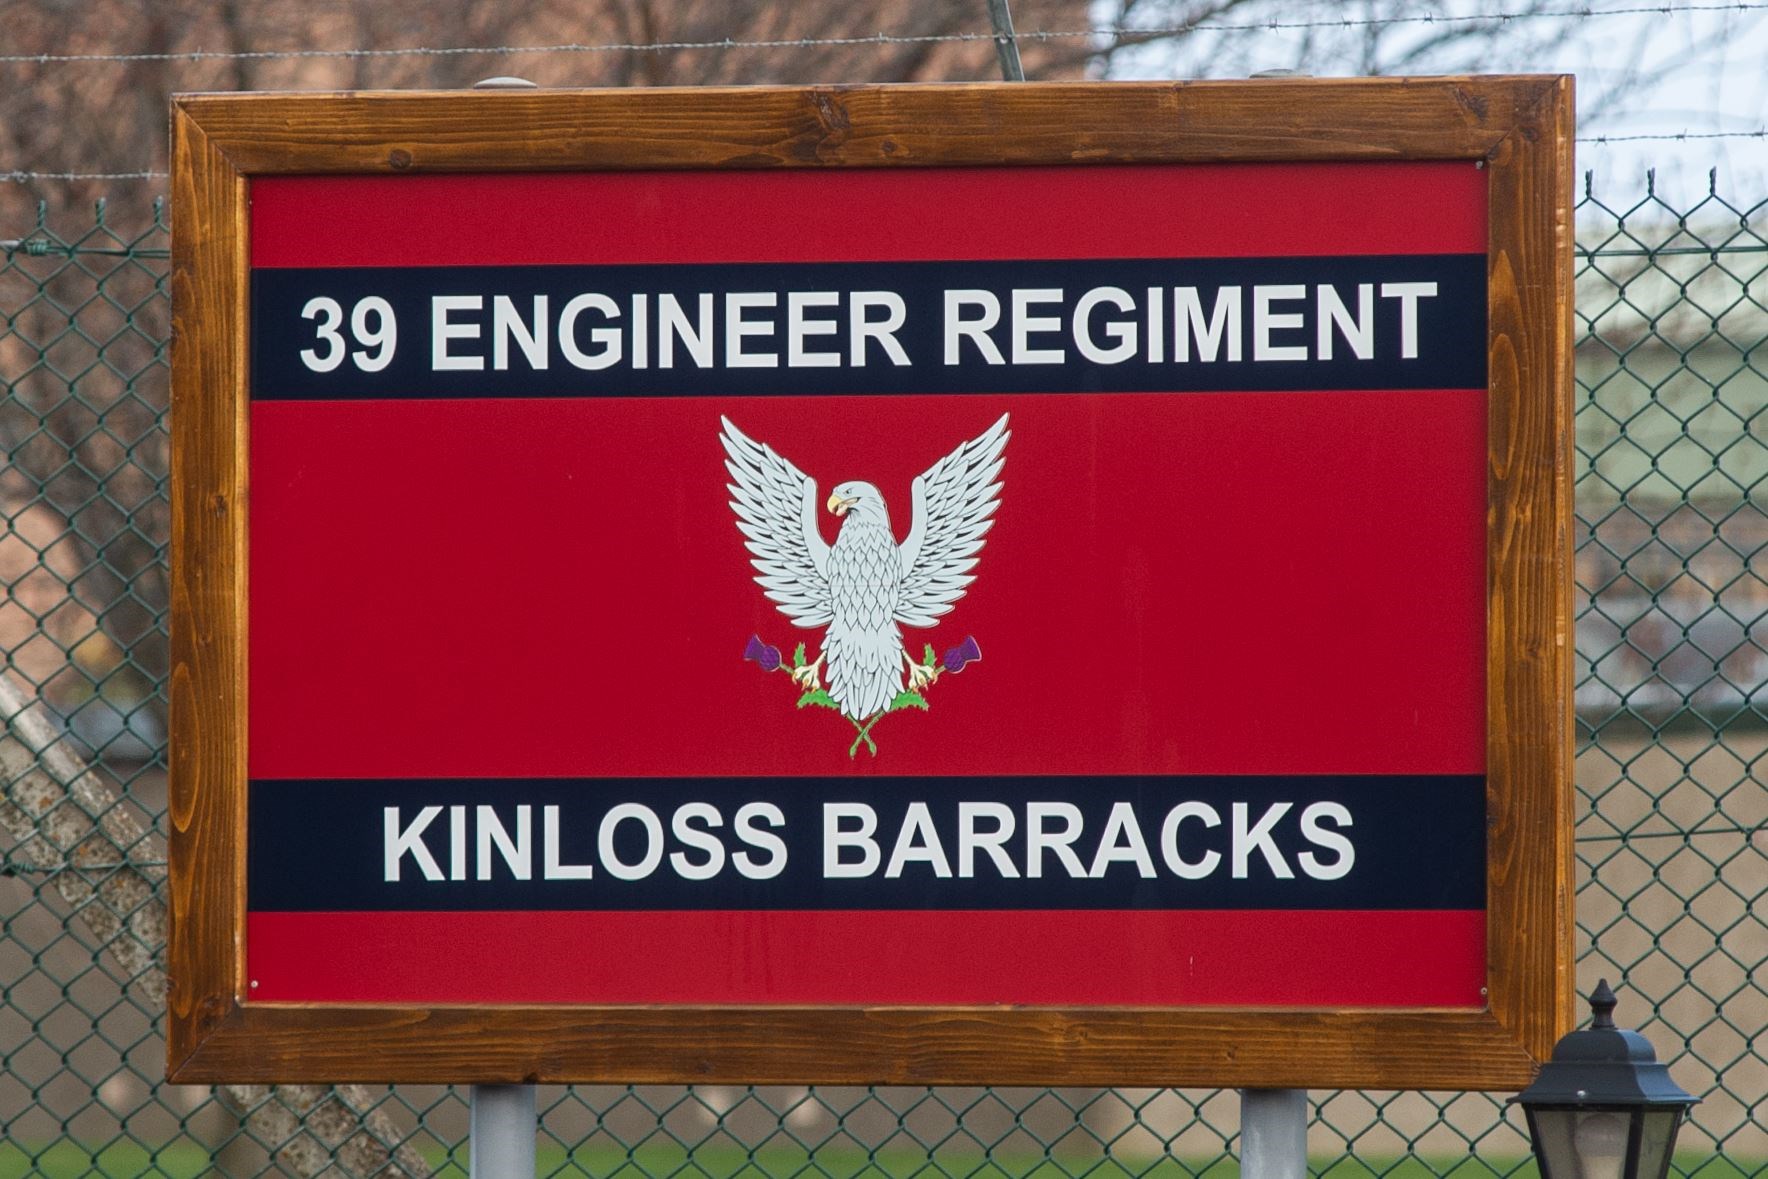 Kinloss Barracks is home to 39 Engineer Regiment.Picture: Daniel Forsyth